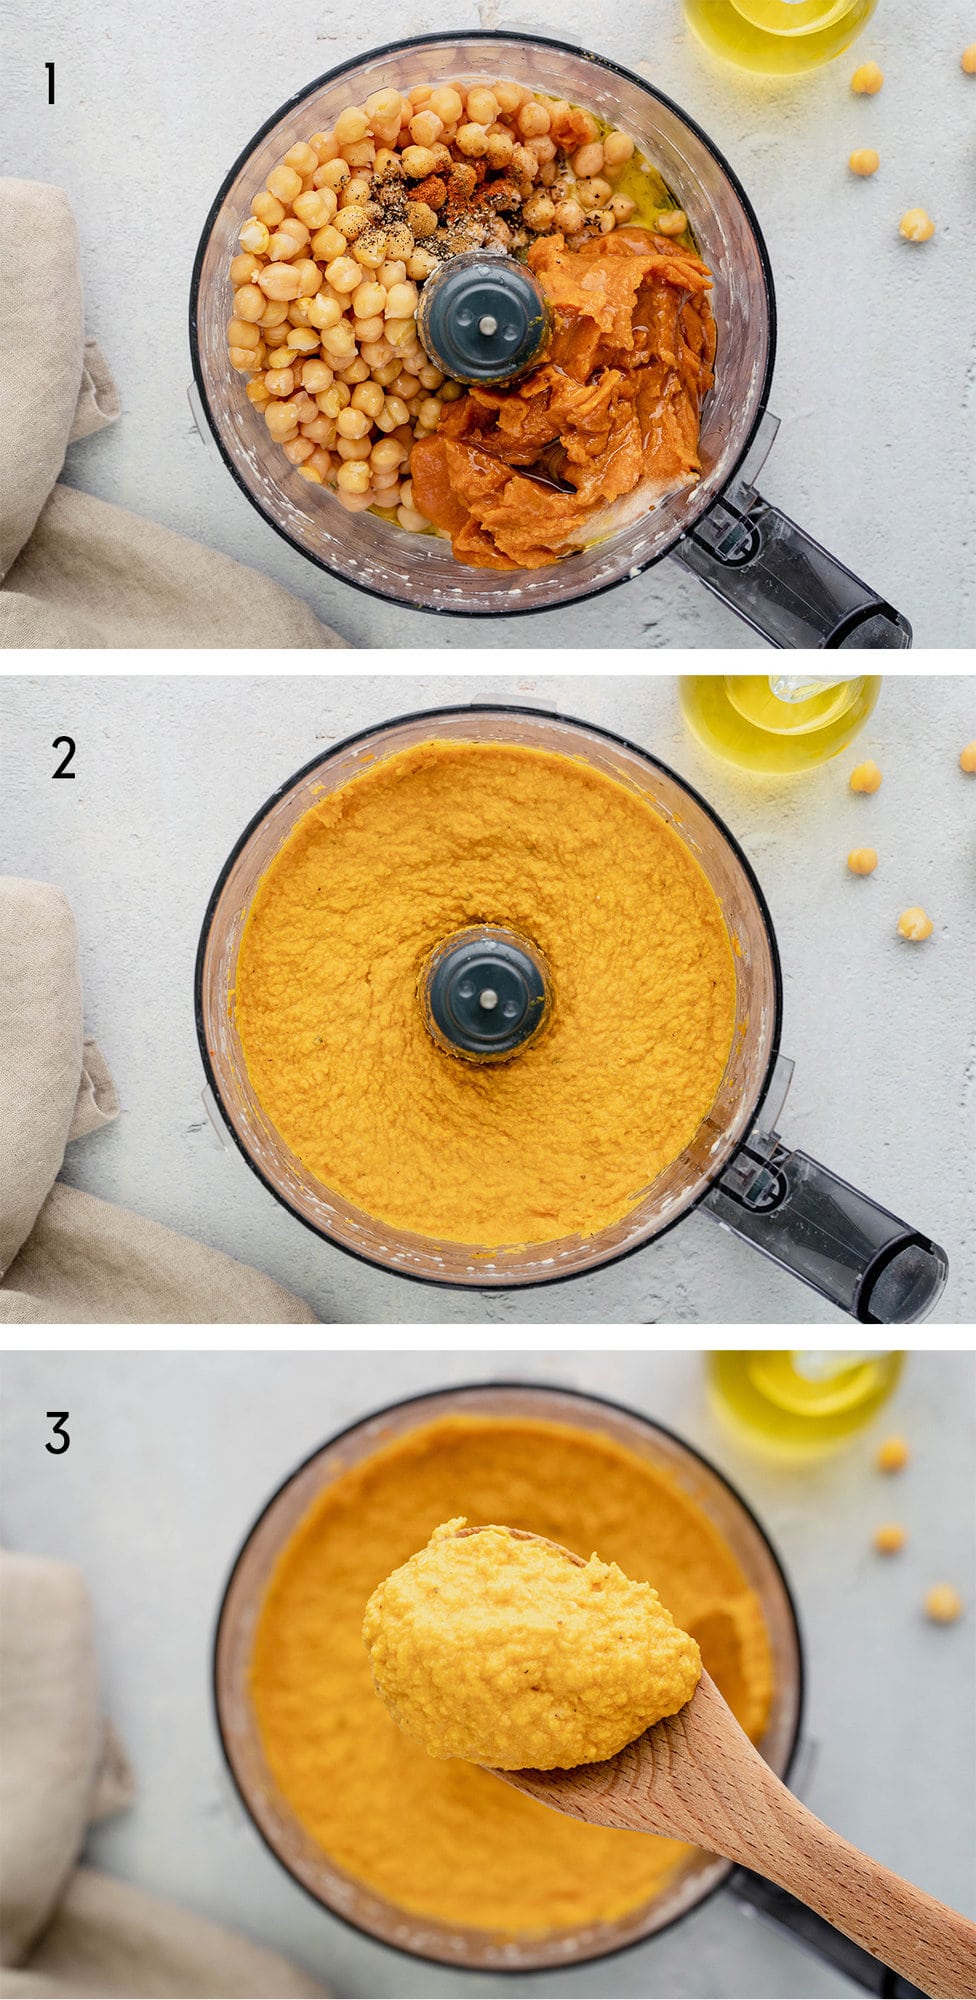 Collage of three images showing how to make hummus in a food processor.